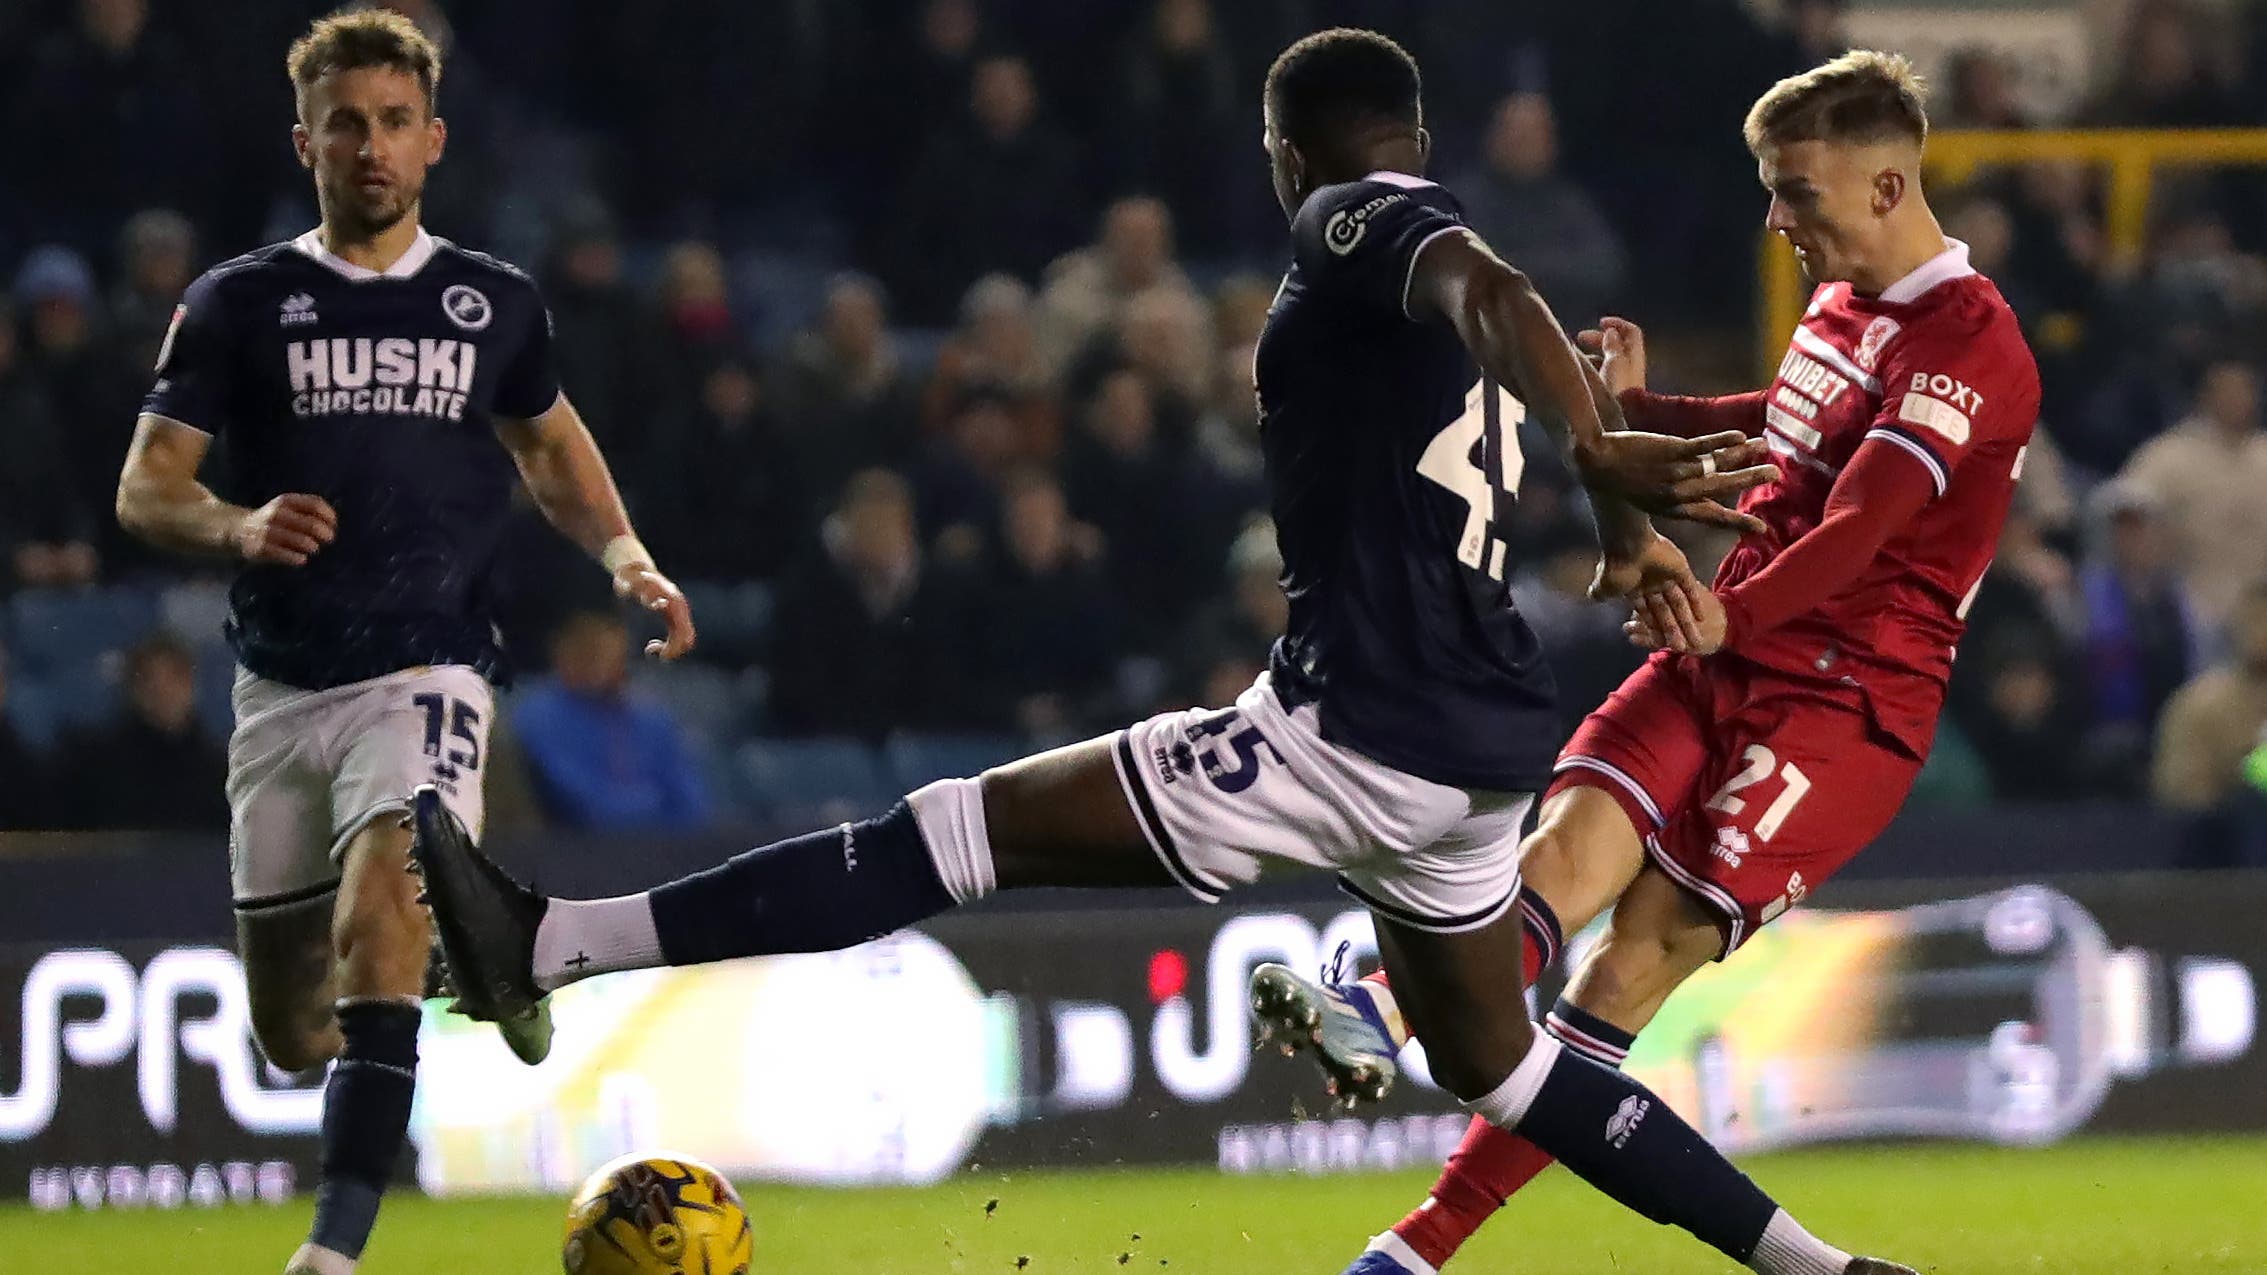 Boro come from behind to round off a good week with win at Millwall